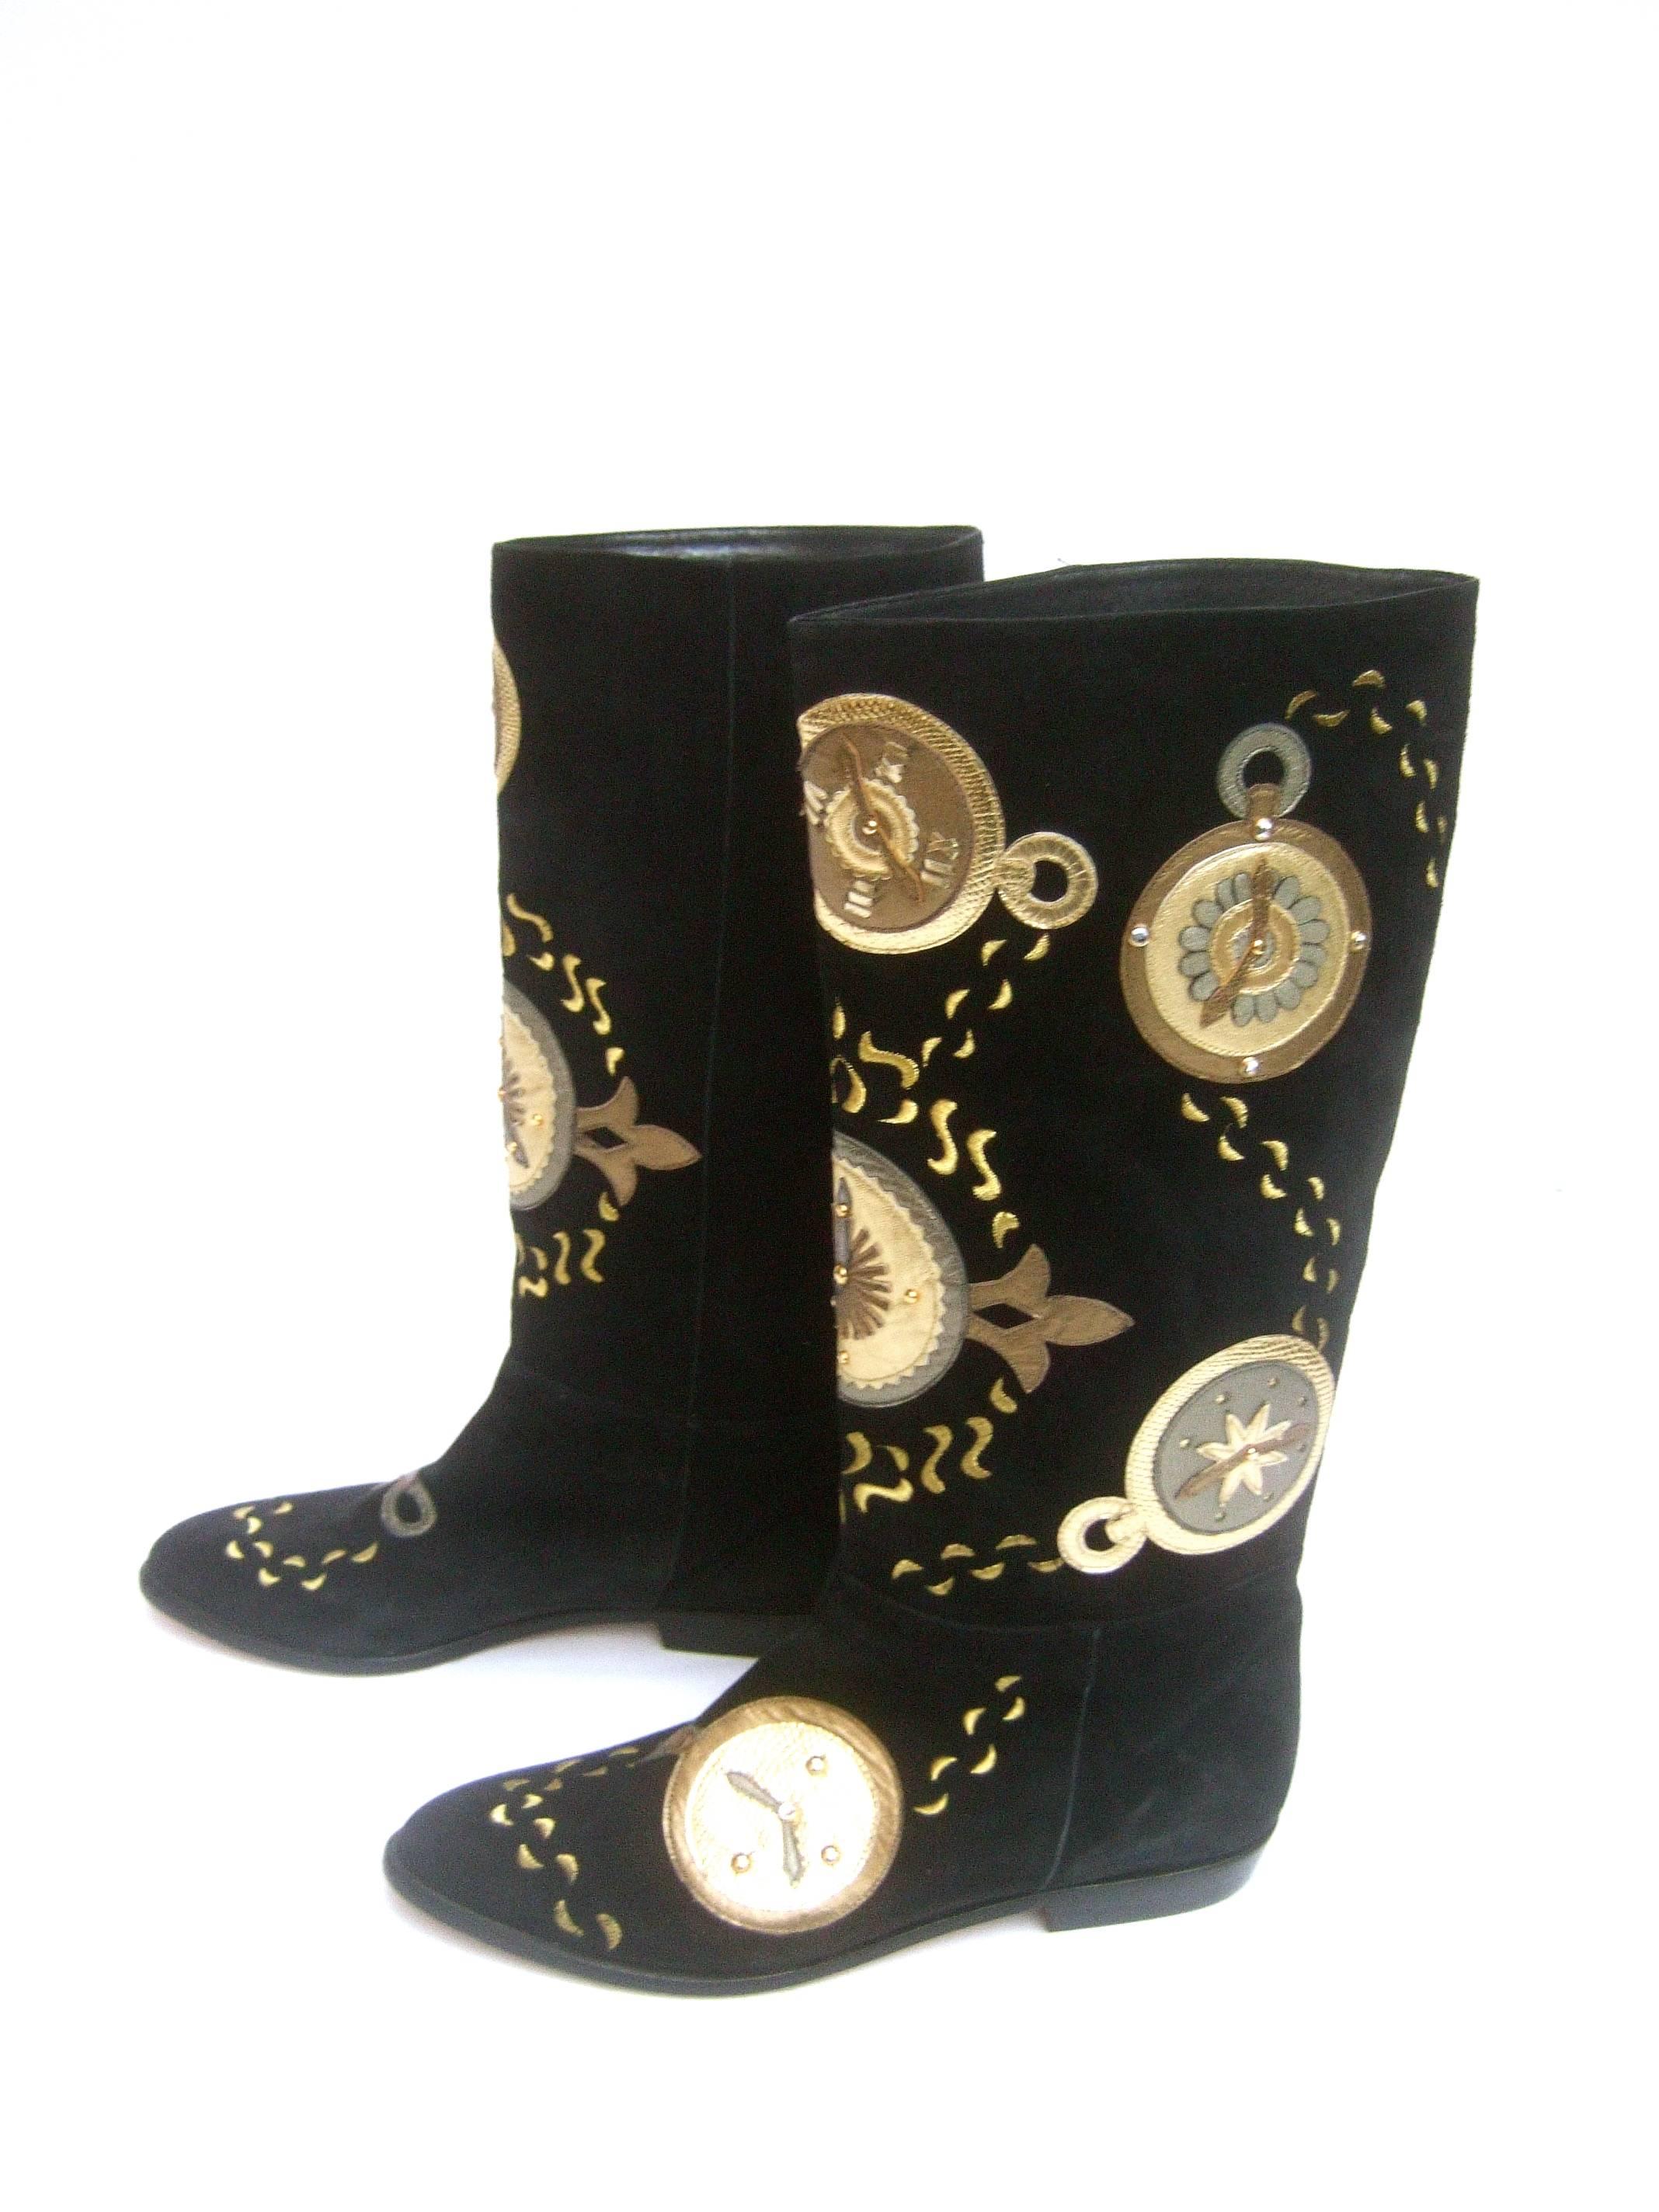 Black suede metallic clock theme boots by Zalo US Size 9 M
The unique plush black suede boots are designed
with a series of metallic applique clock dials 

The gold & bronze applique timepieces are
accented with sinuous gold embroidery   
that